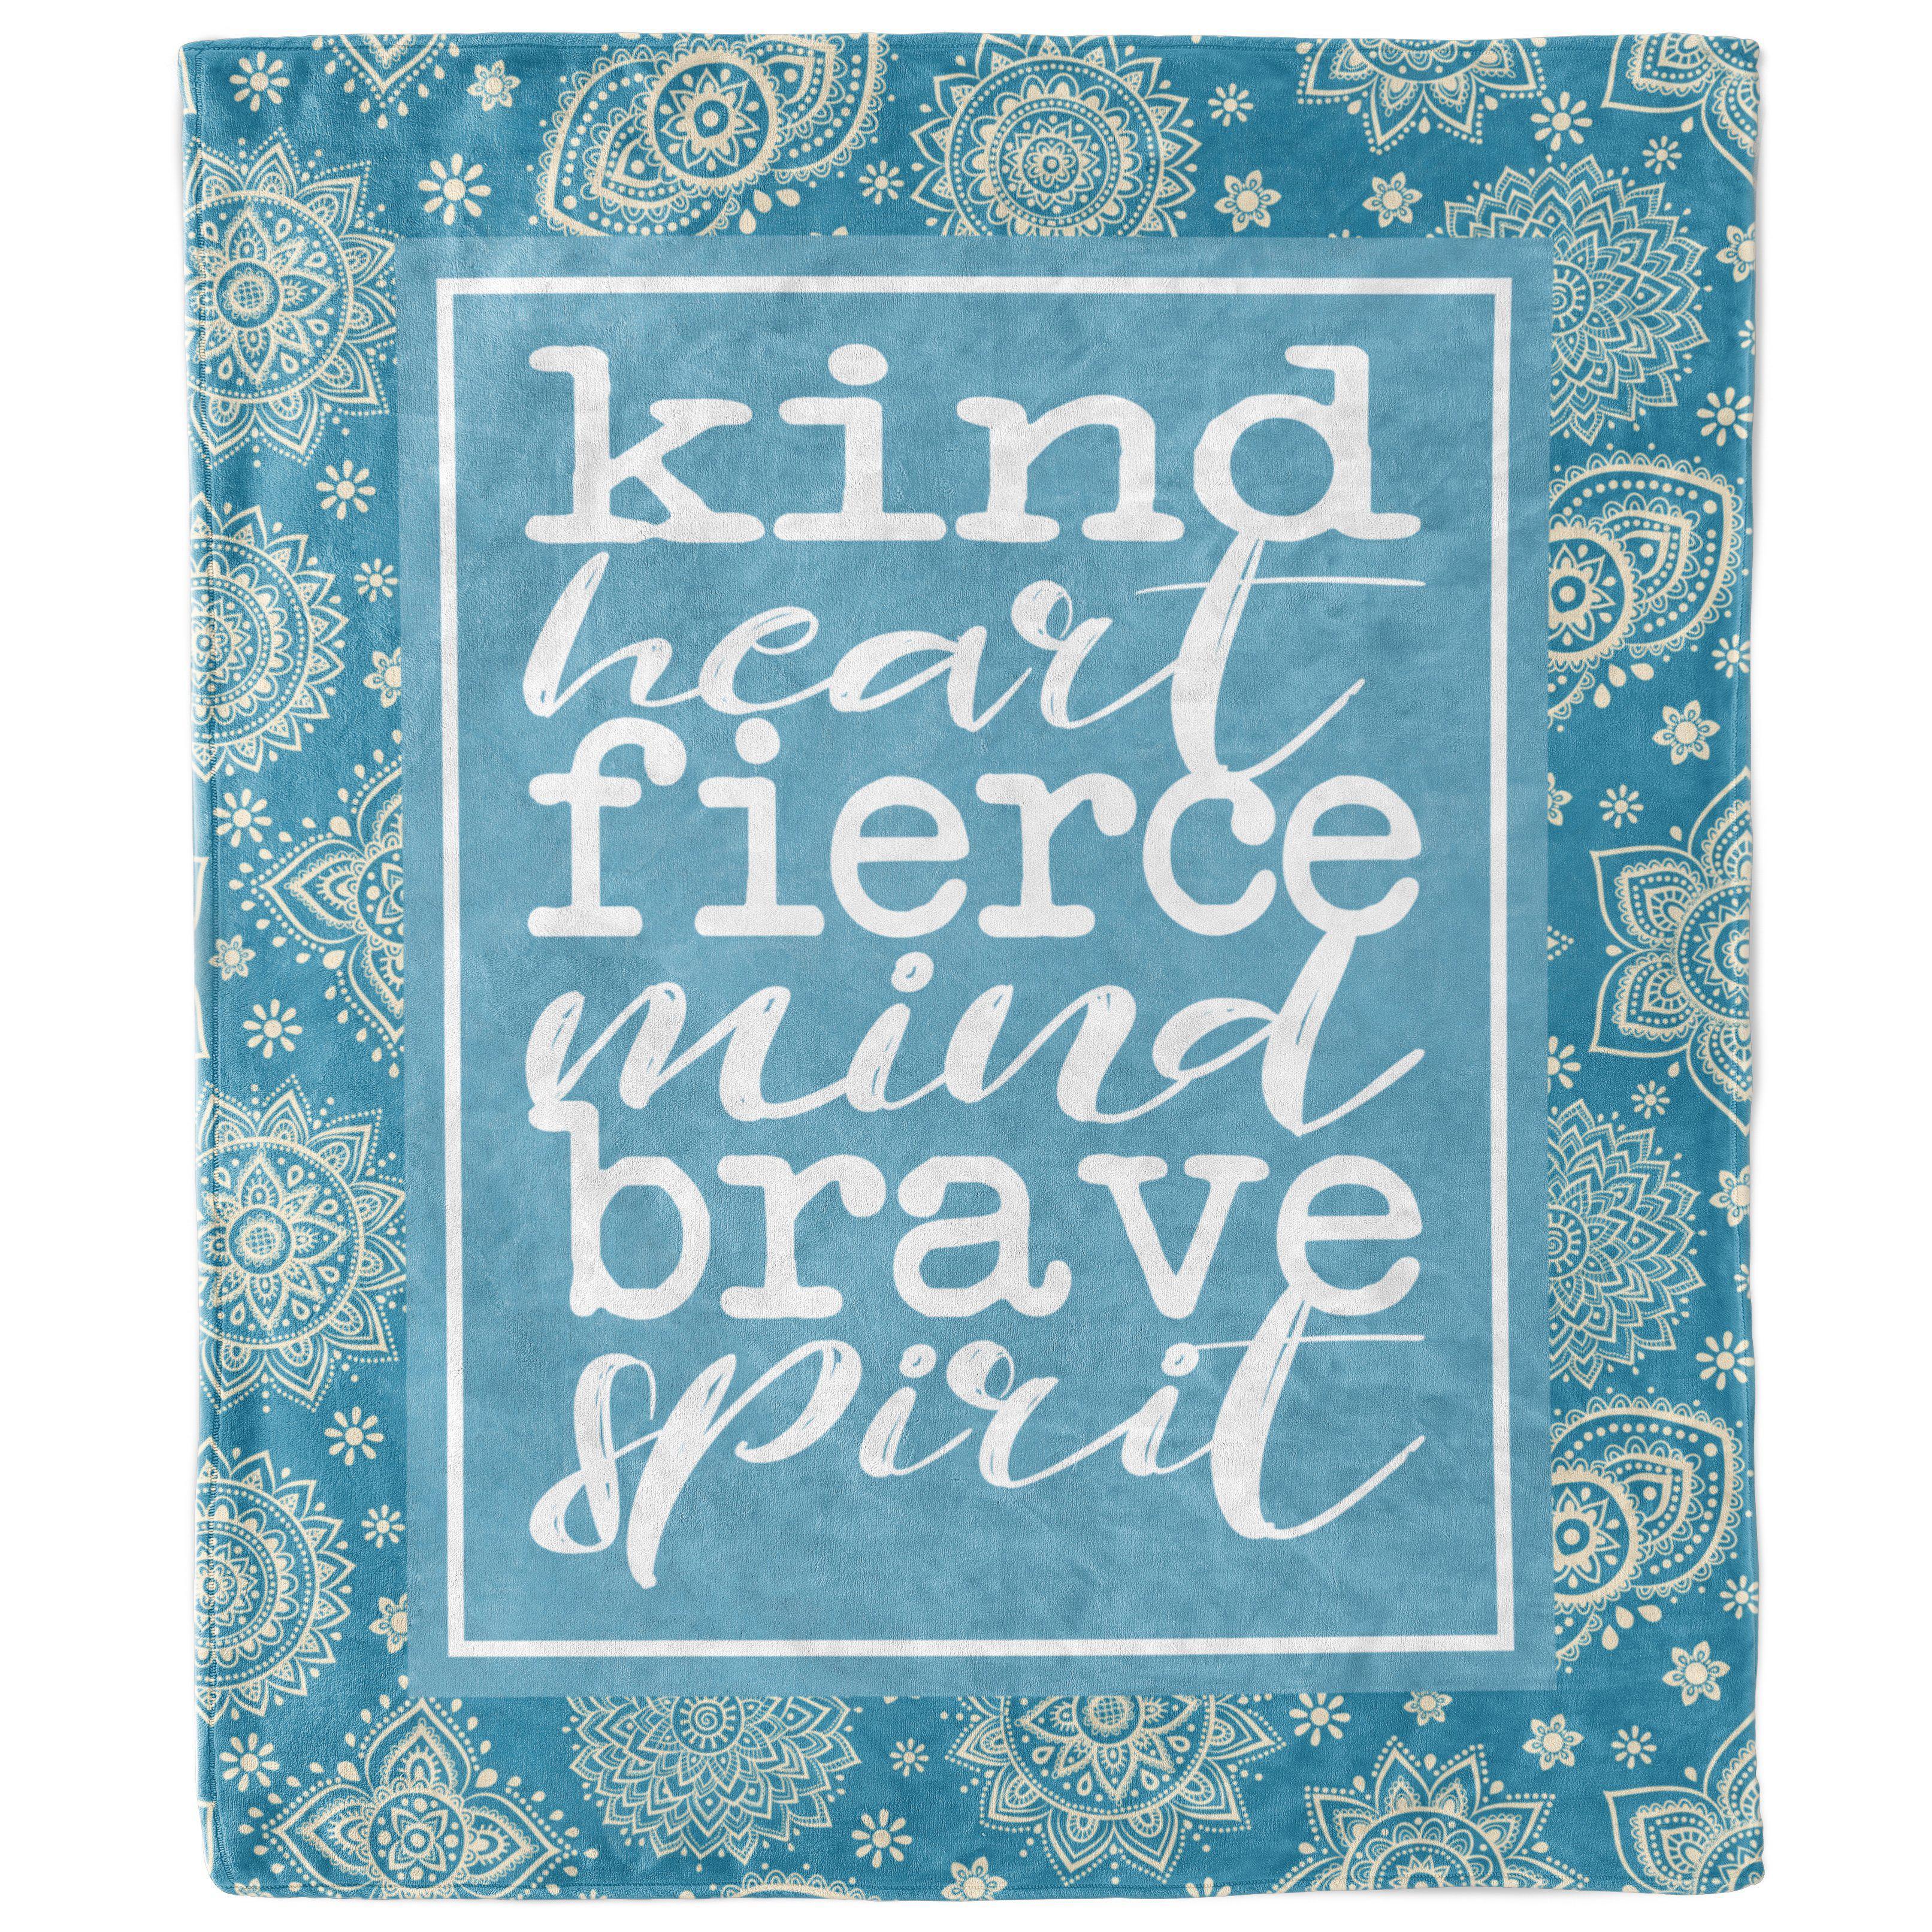 Kind Heart Wise Mind Brave Spirit Stock Vector (Royalty Free